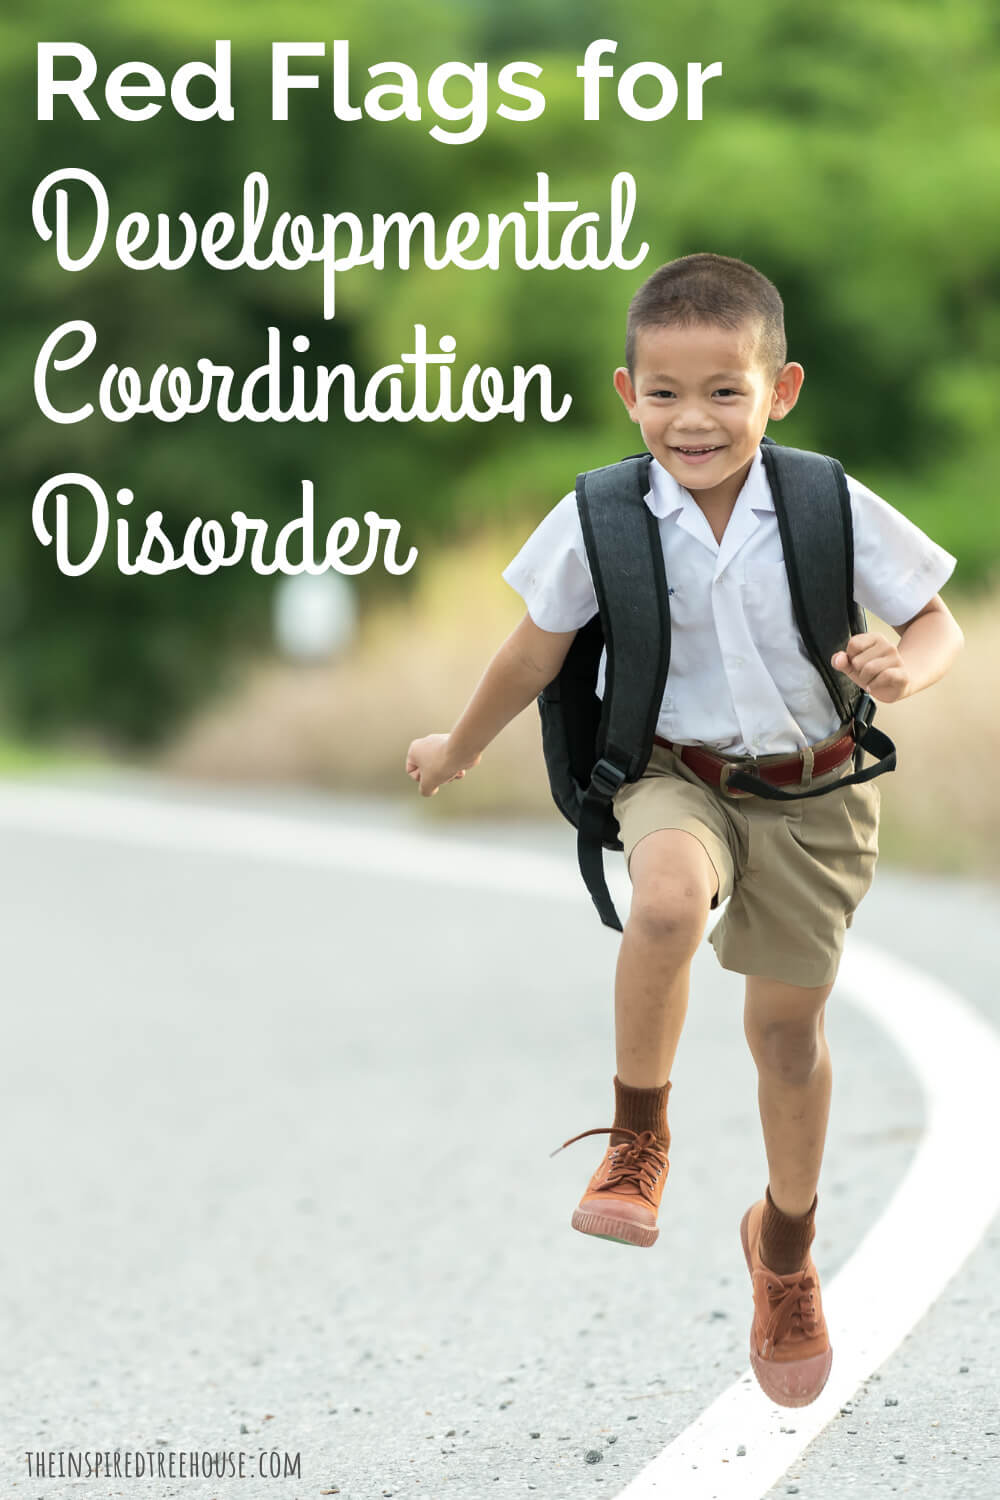 Child running, wearing backpack, text says Red Flags for Developmental Coordination Disorder